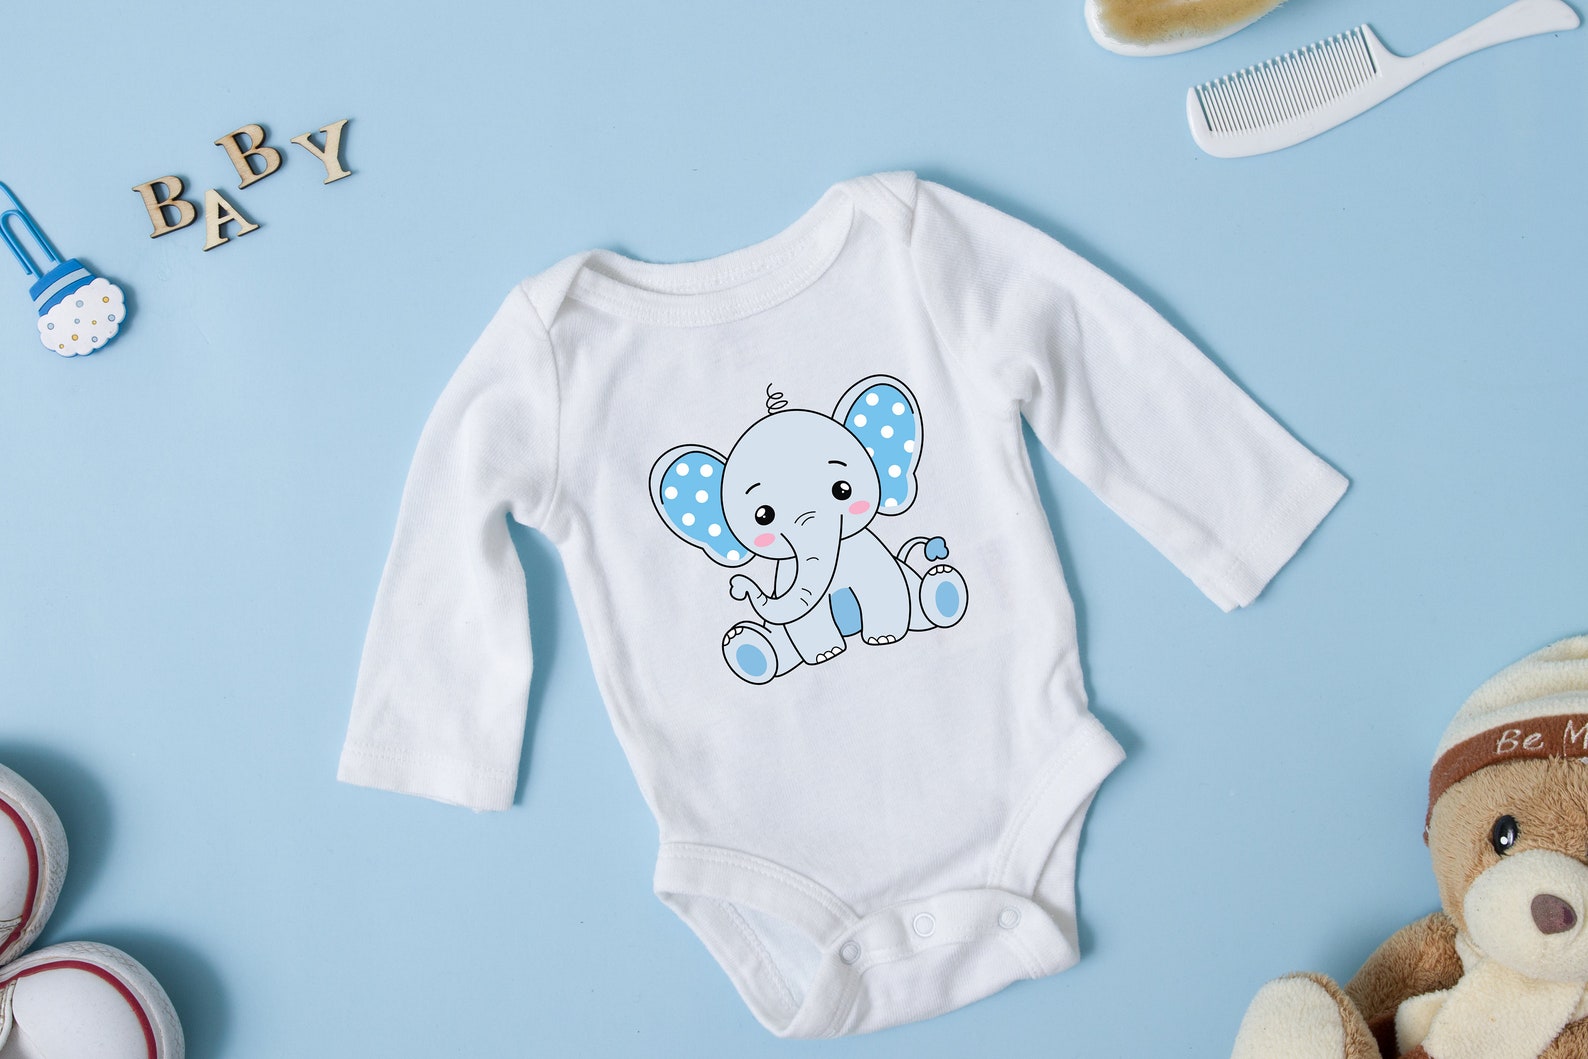 Baby bodysuit with a picture of an elephant on it.